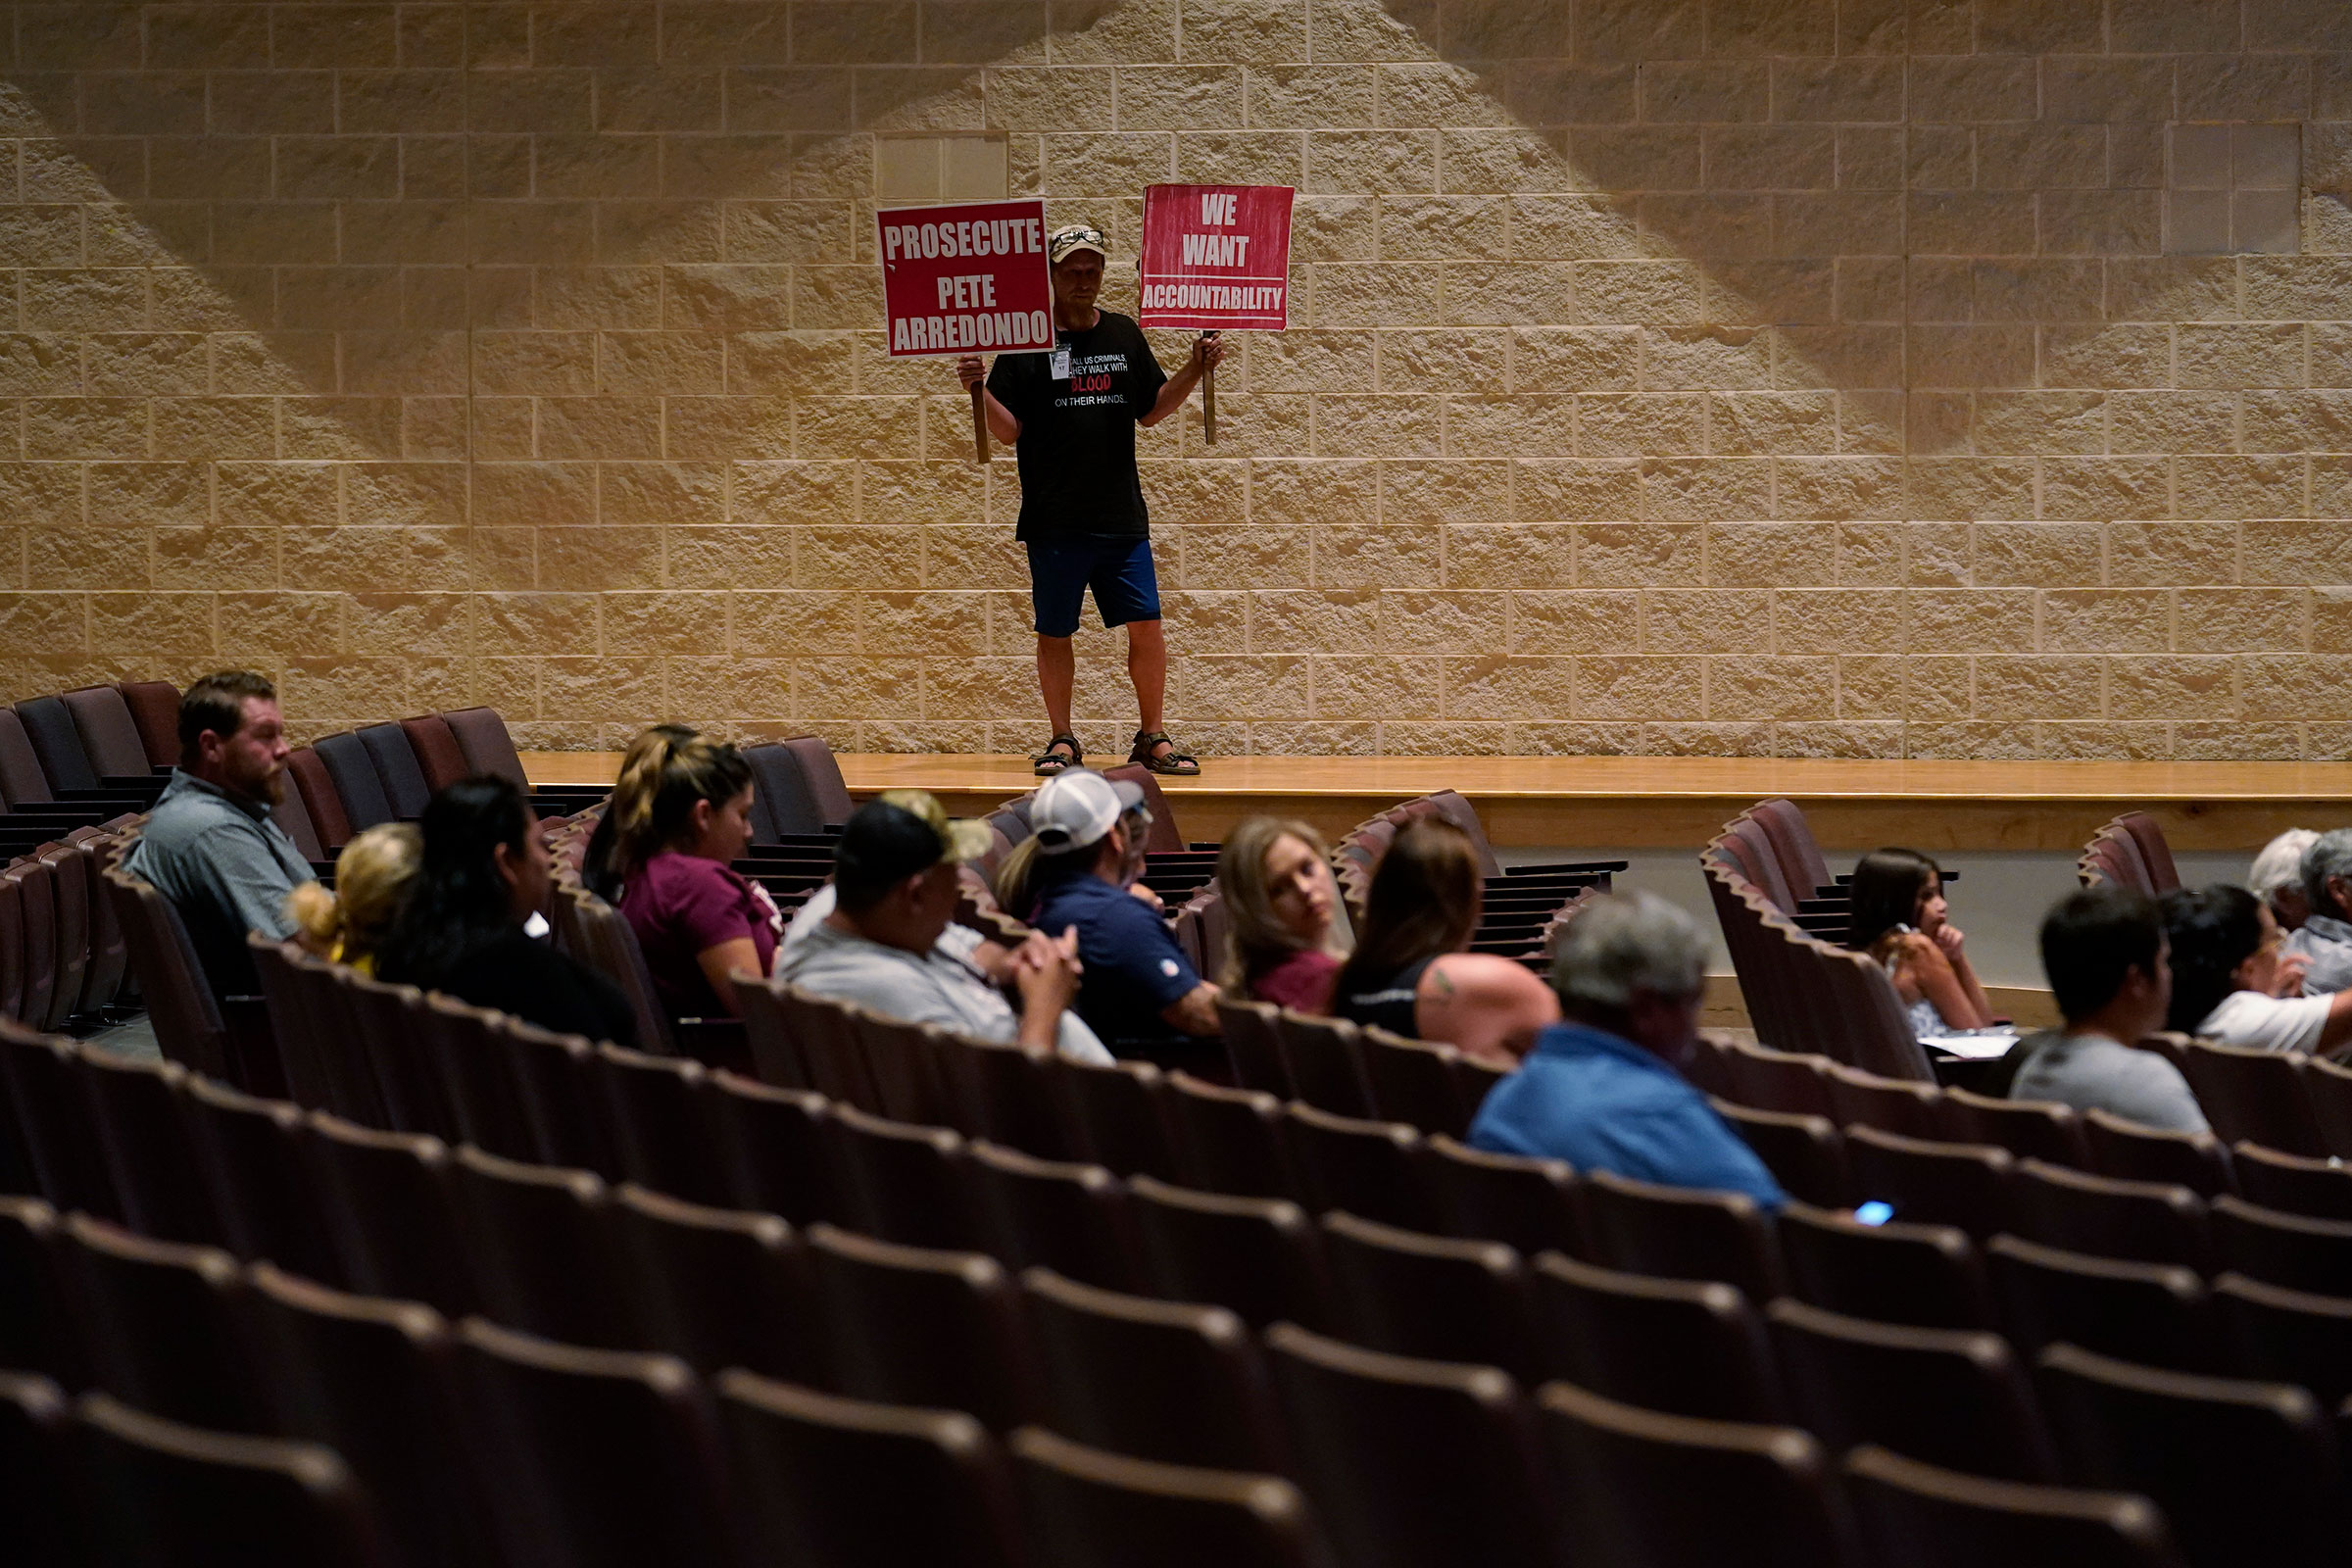 Michael Brown holds protest signs during a special school board meeting in Uvalde to address concerns over last month's shootings at Robb Elementary School, on July 18. (Eric Gay—AP)